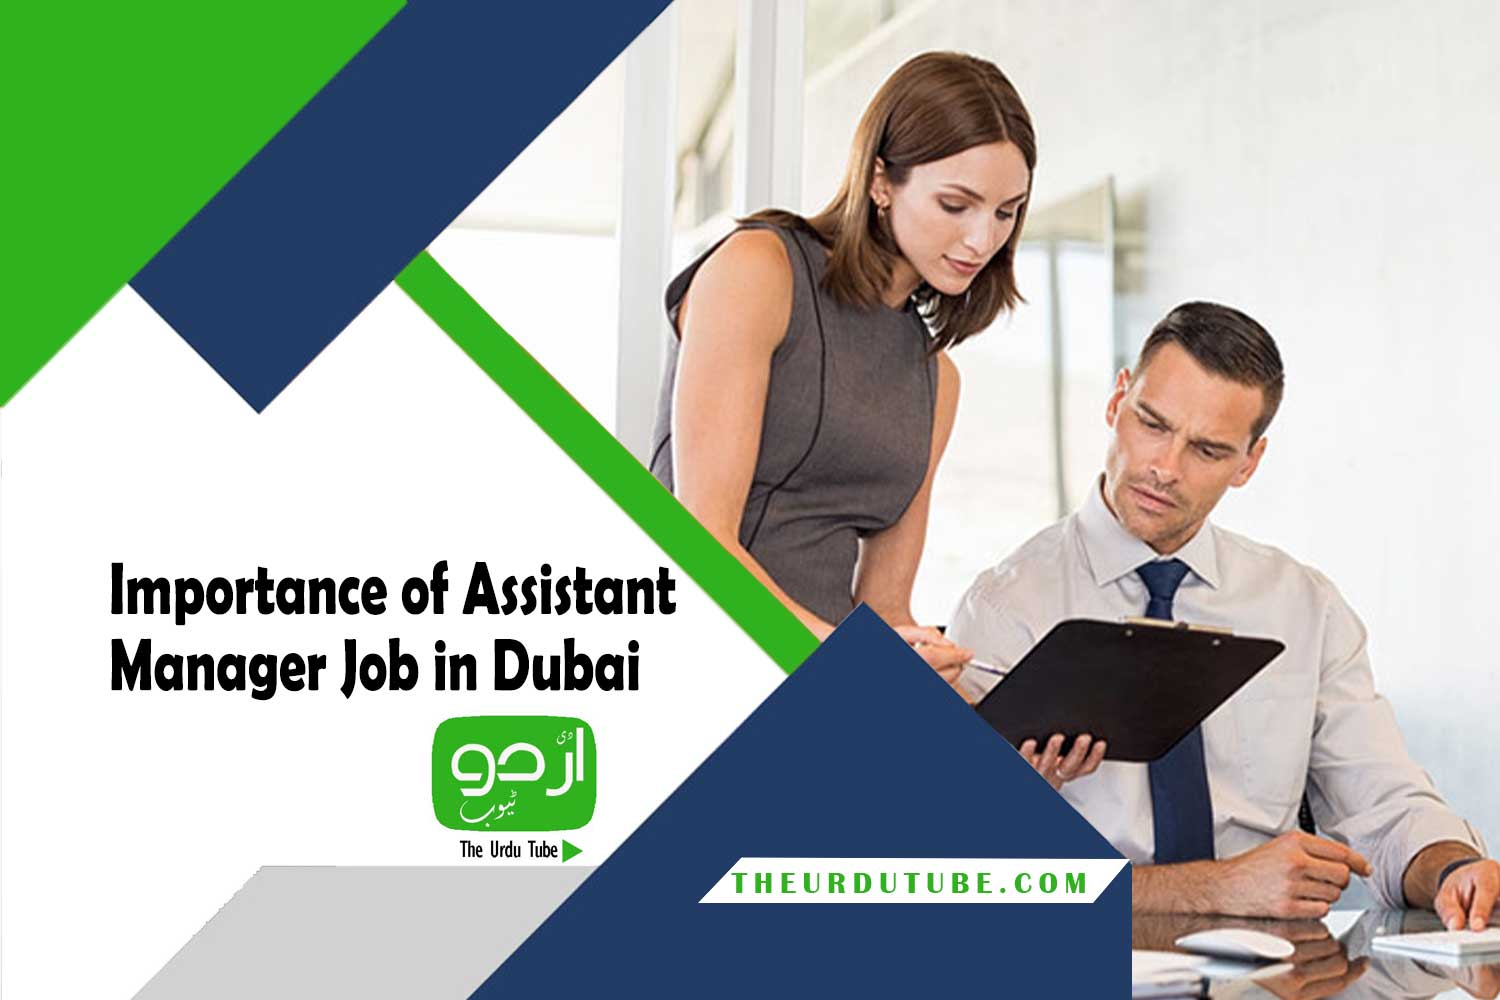 Importance of Assistant Manager Job in Dubai